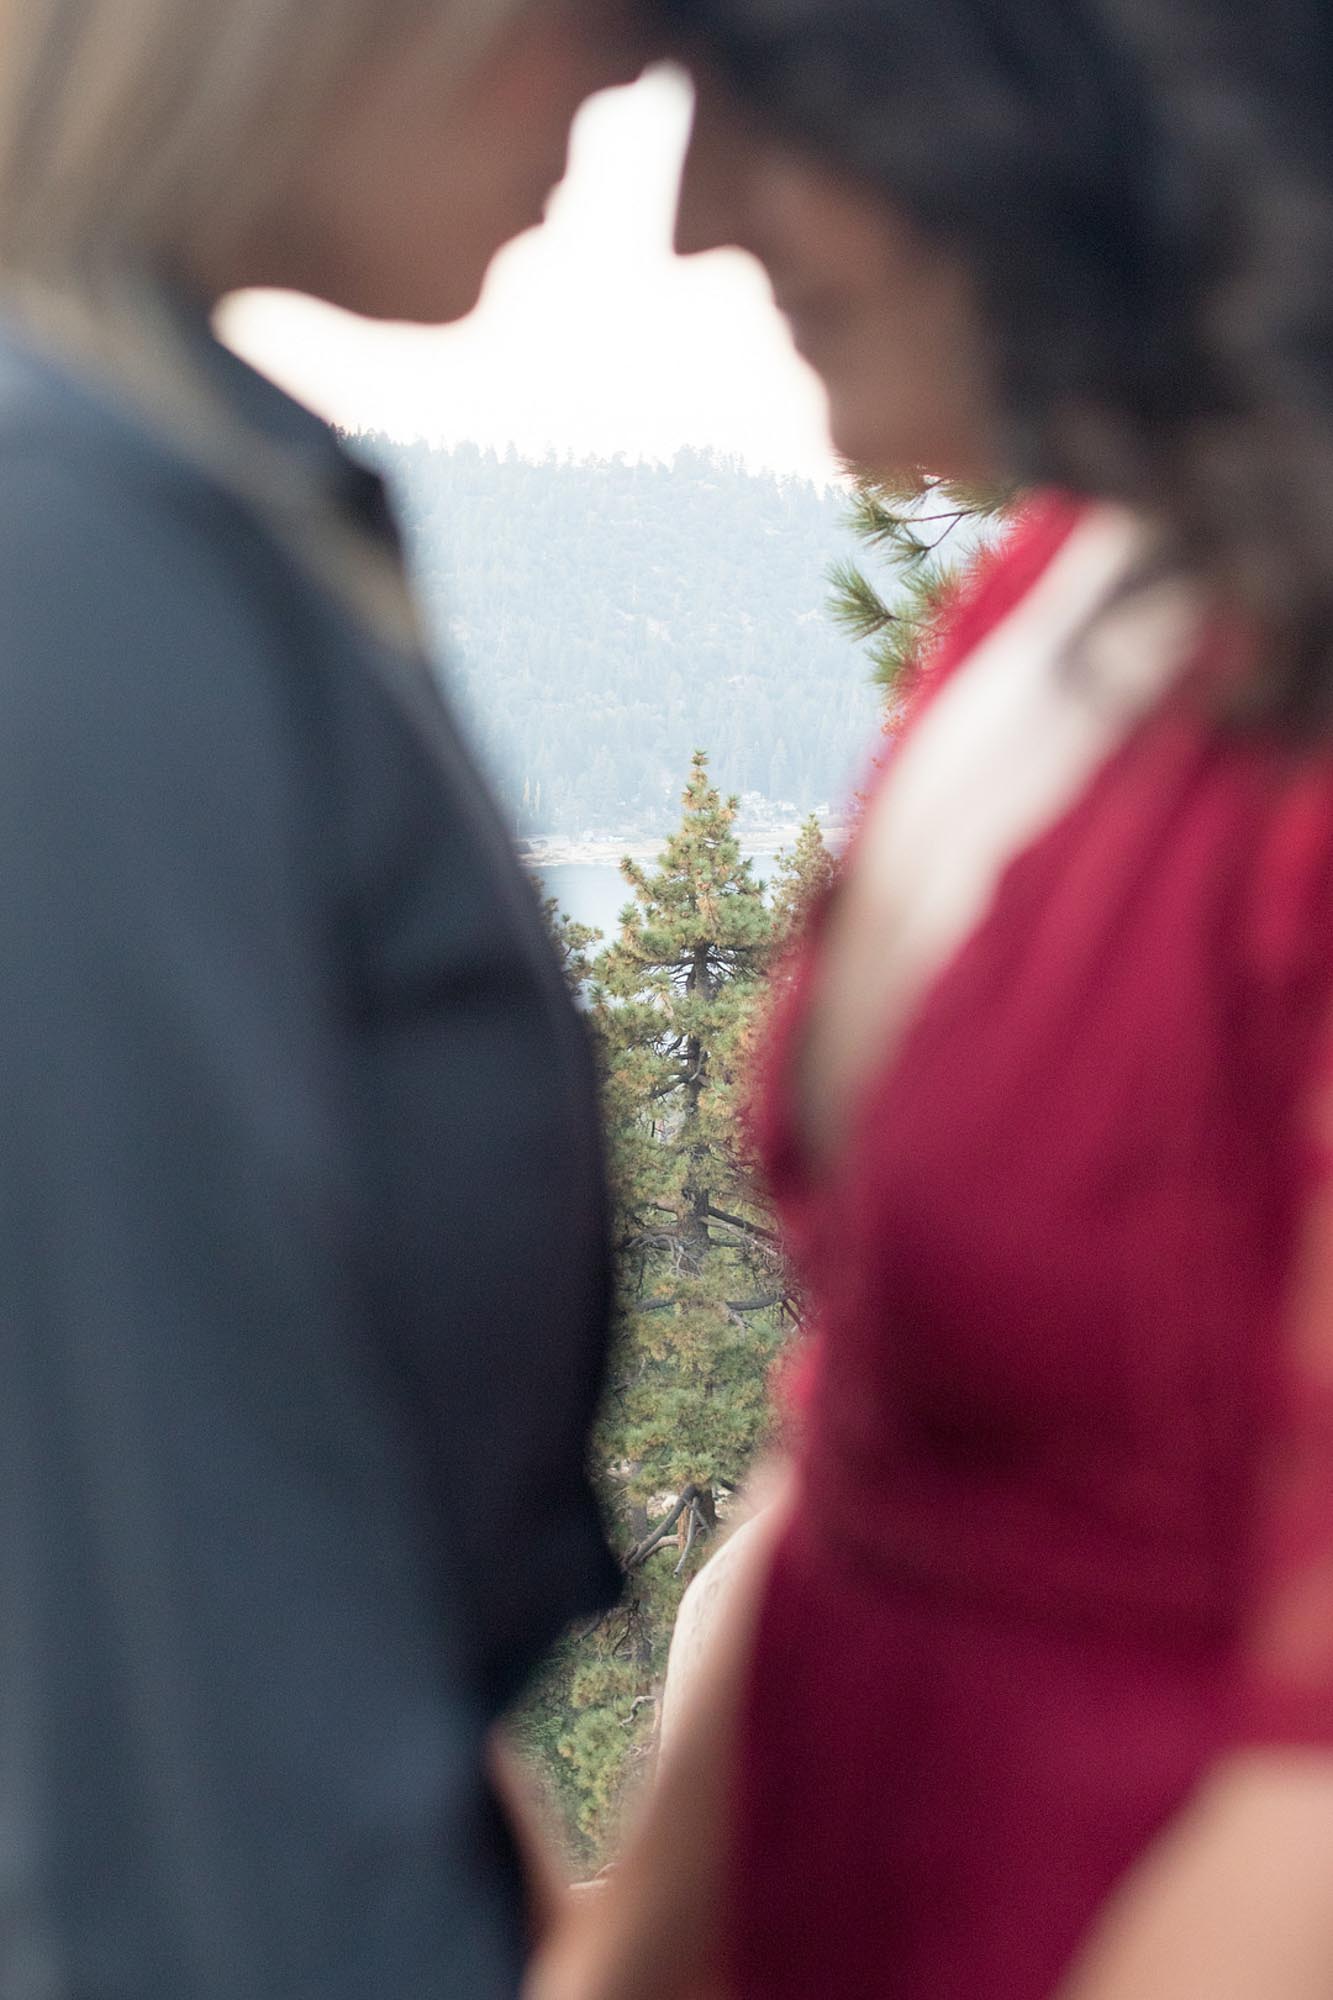 Big Bear Lake engagement session with outfit change and pup cameo | Kelly H Photography | Featured on Equally Wed, the leading LGBTQ+ wedding magazine